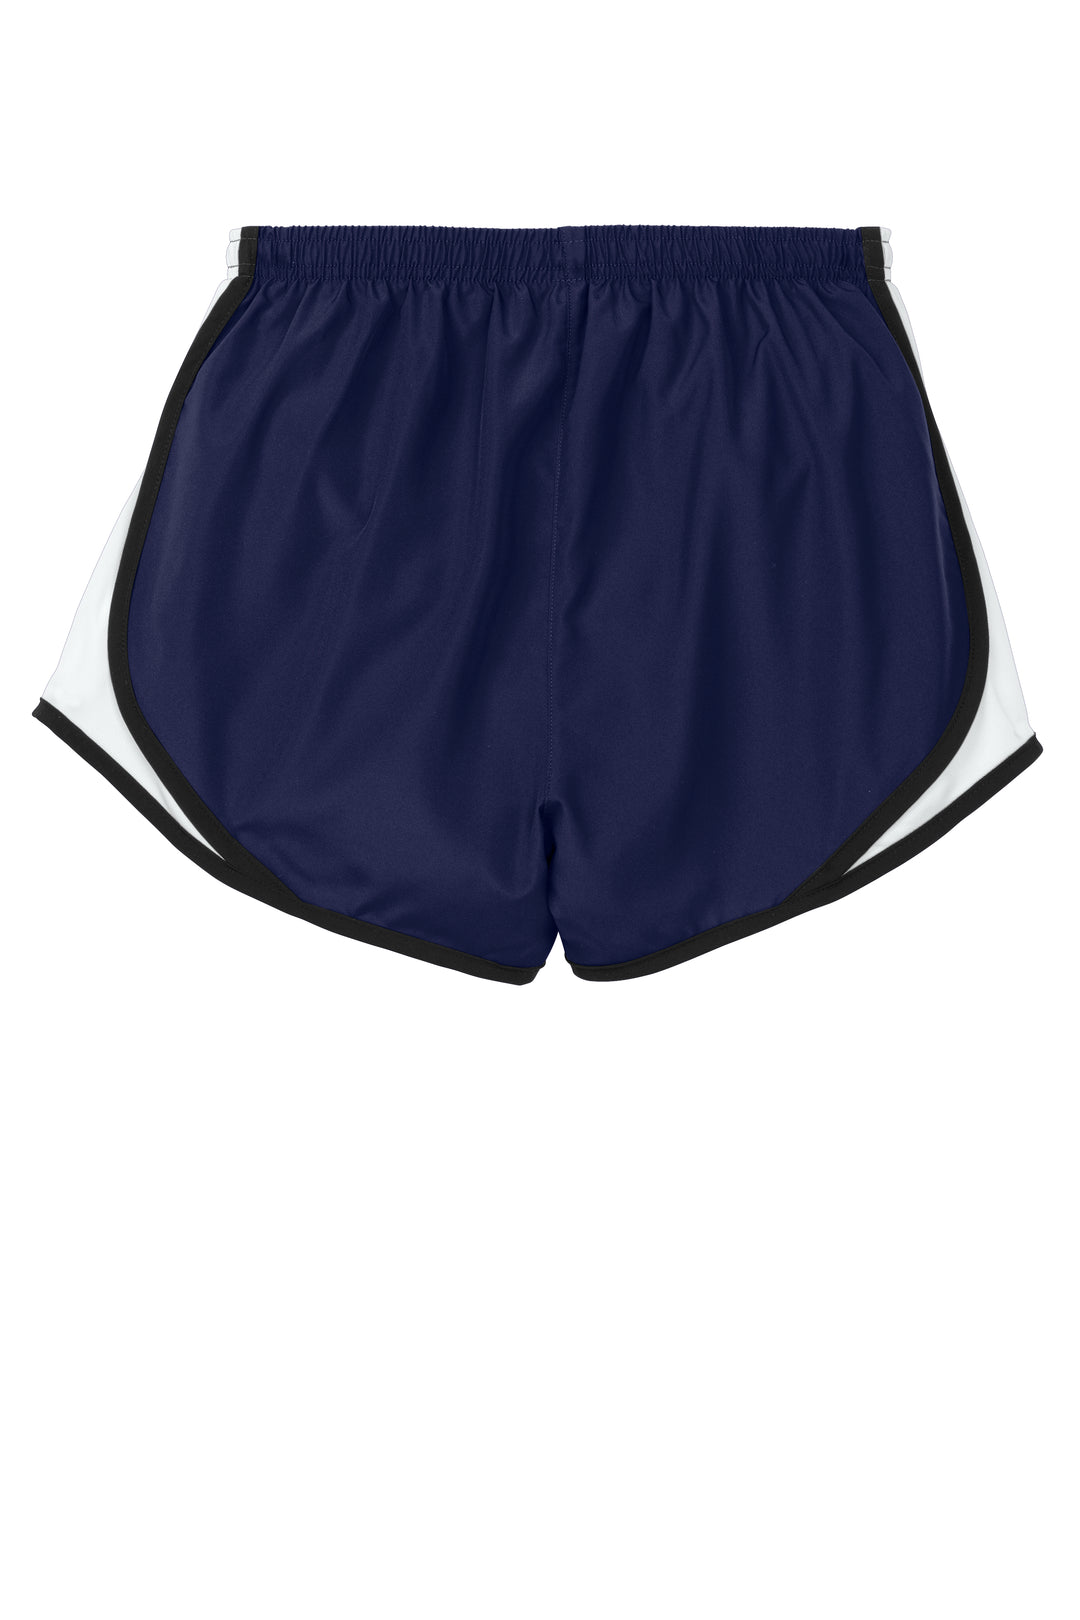 Womens Cadence Shorts (LST304)